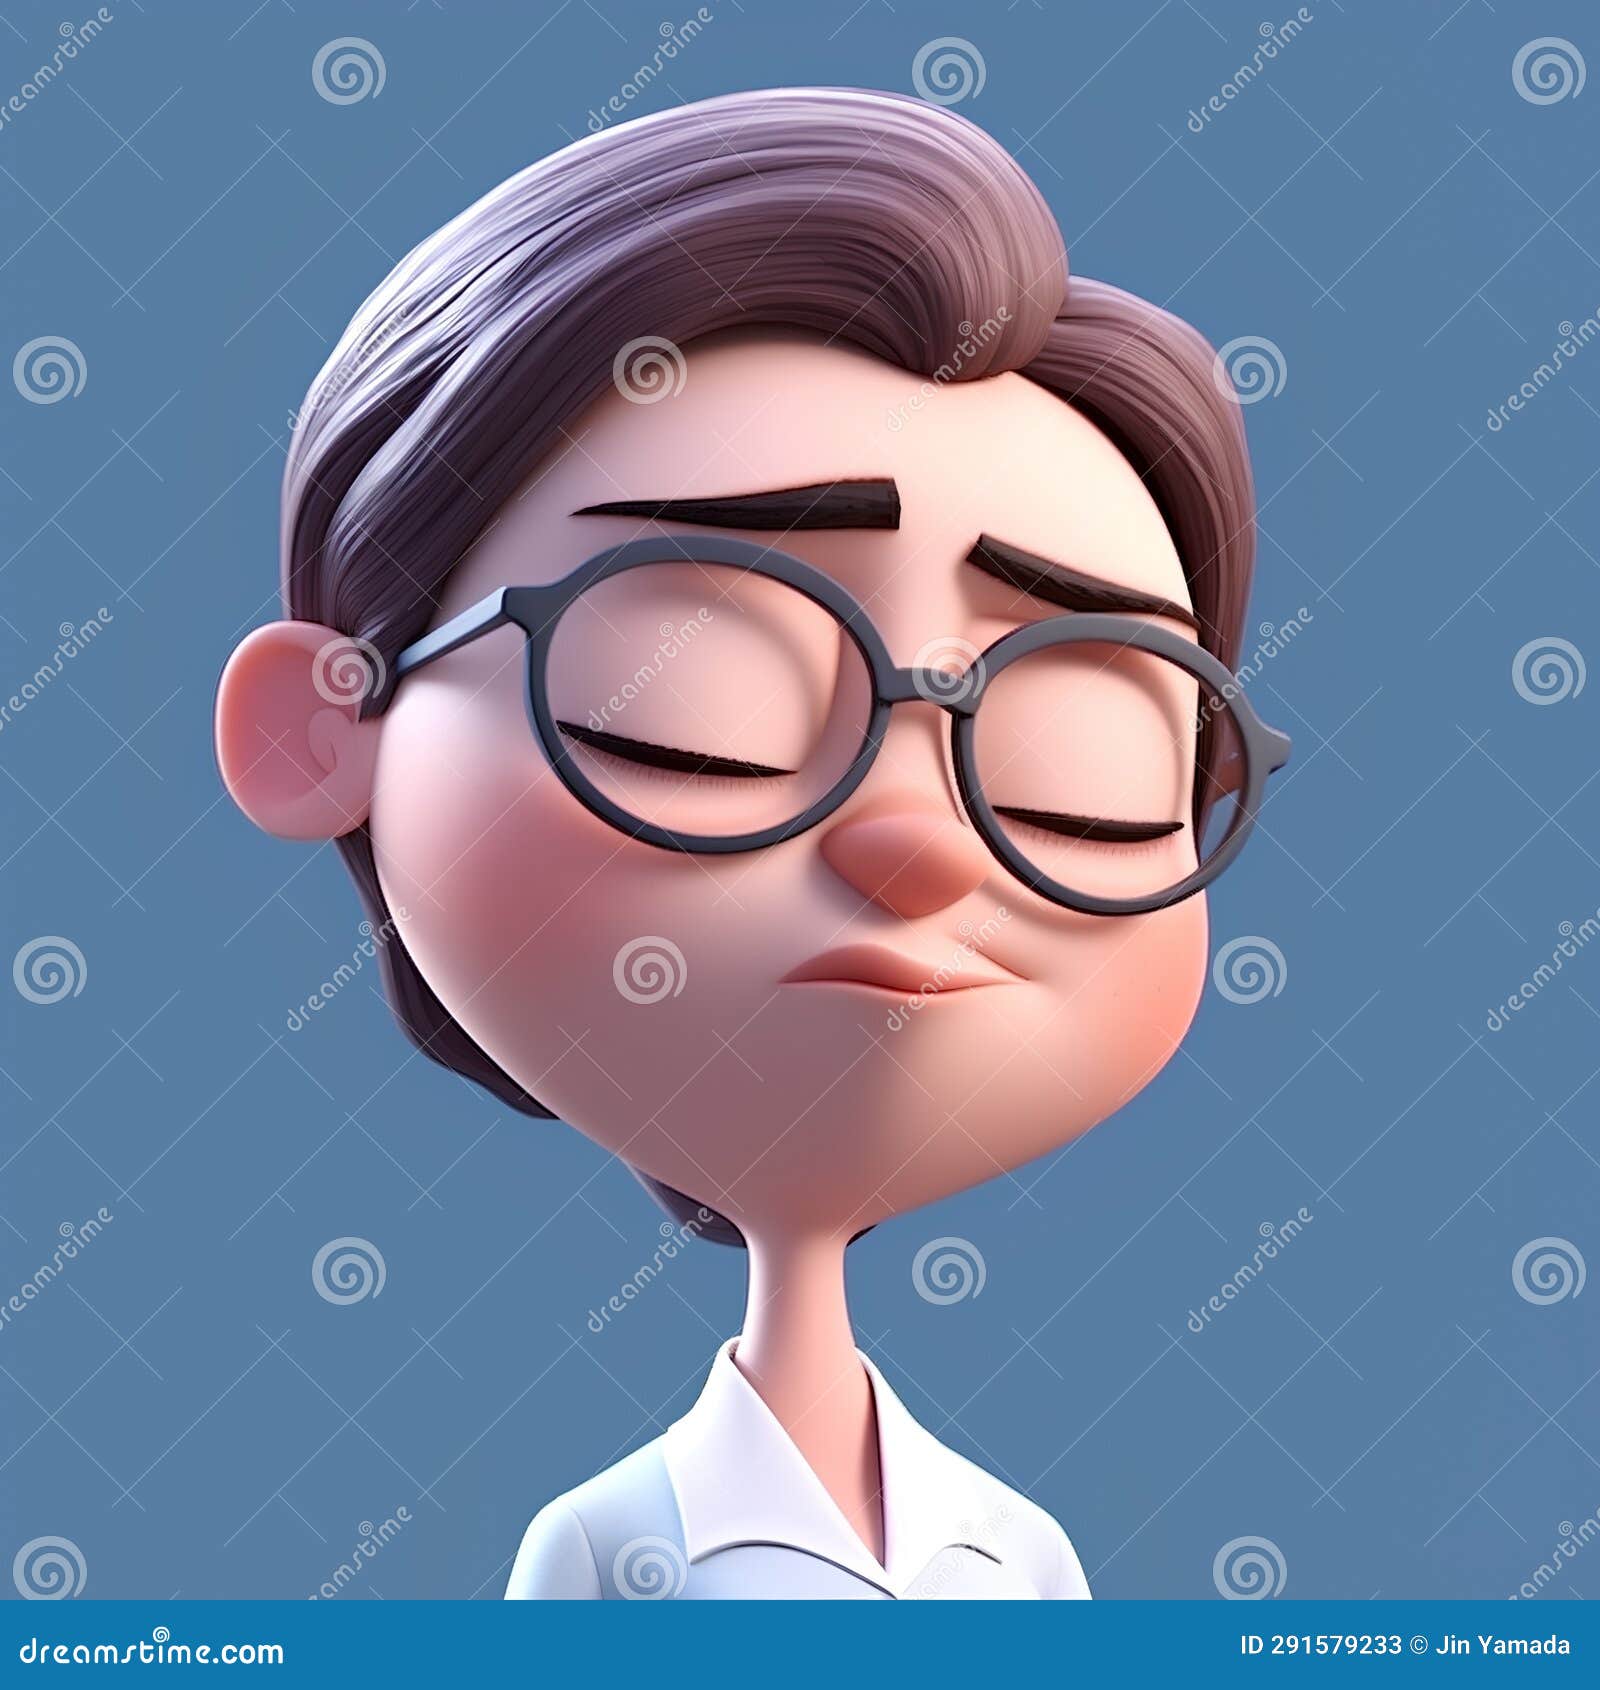 woman with glasses and blue background, 3d rendering. computer digital drawing.